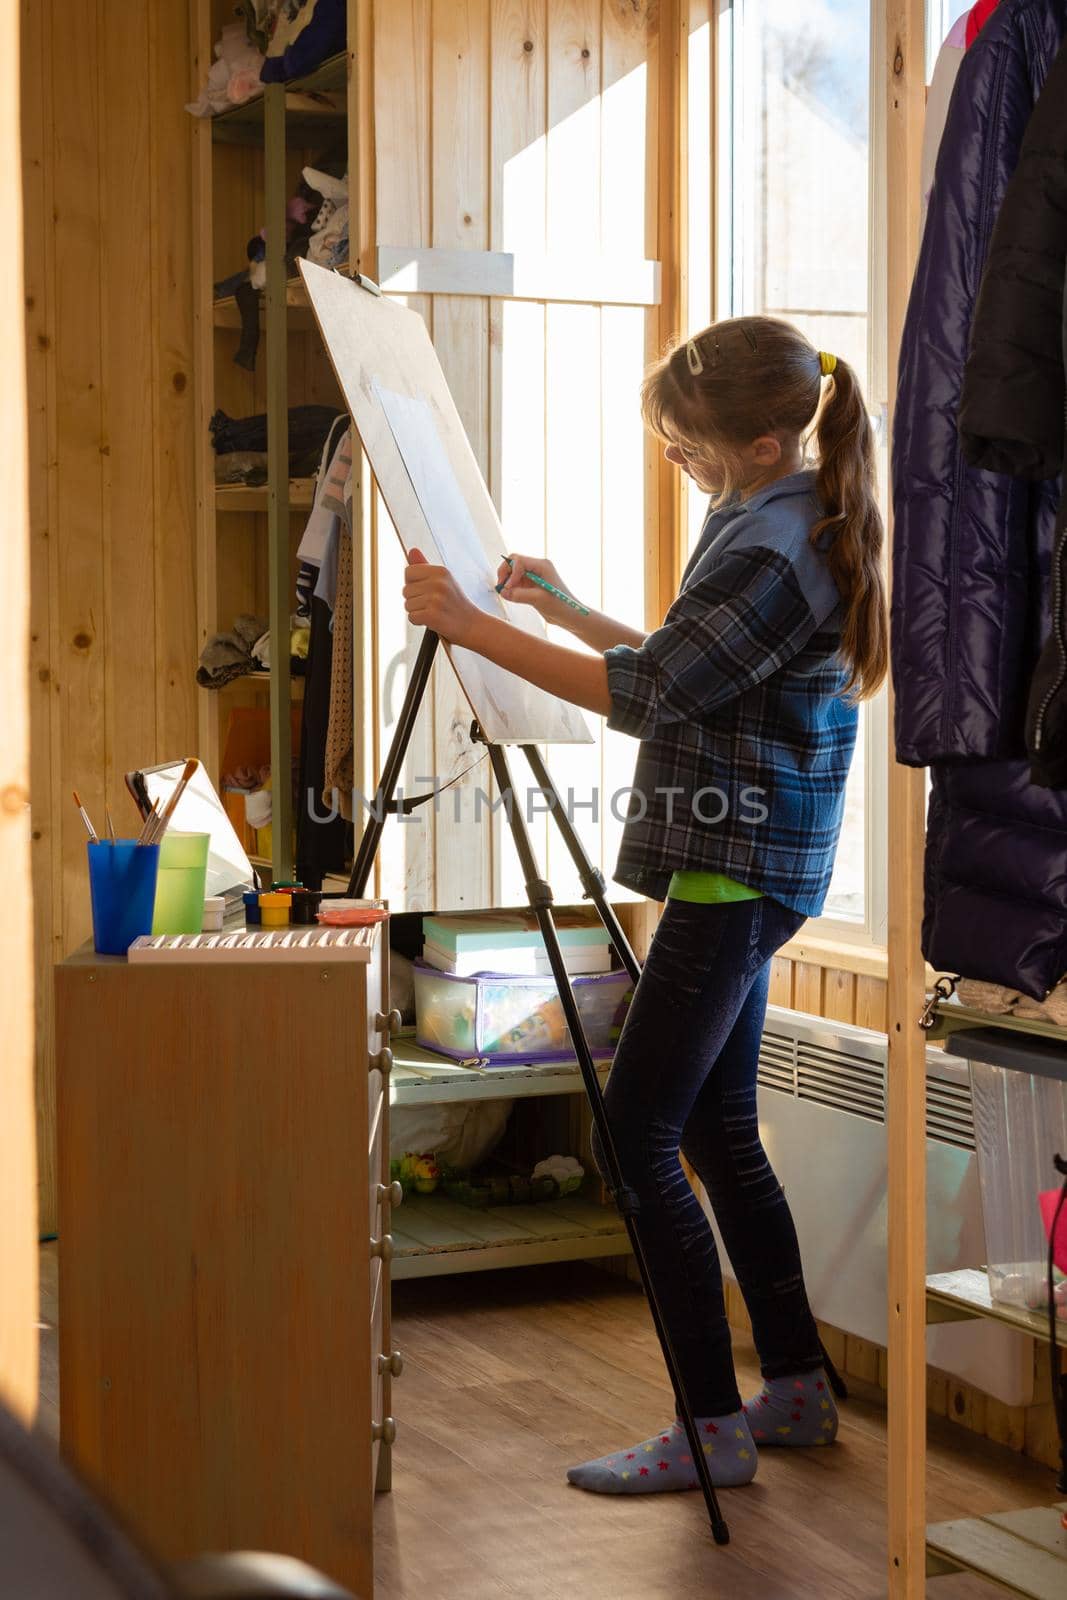 A ten-year-old girl draws with paints on an easel at home by Madhourse